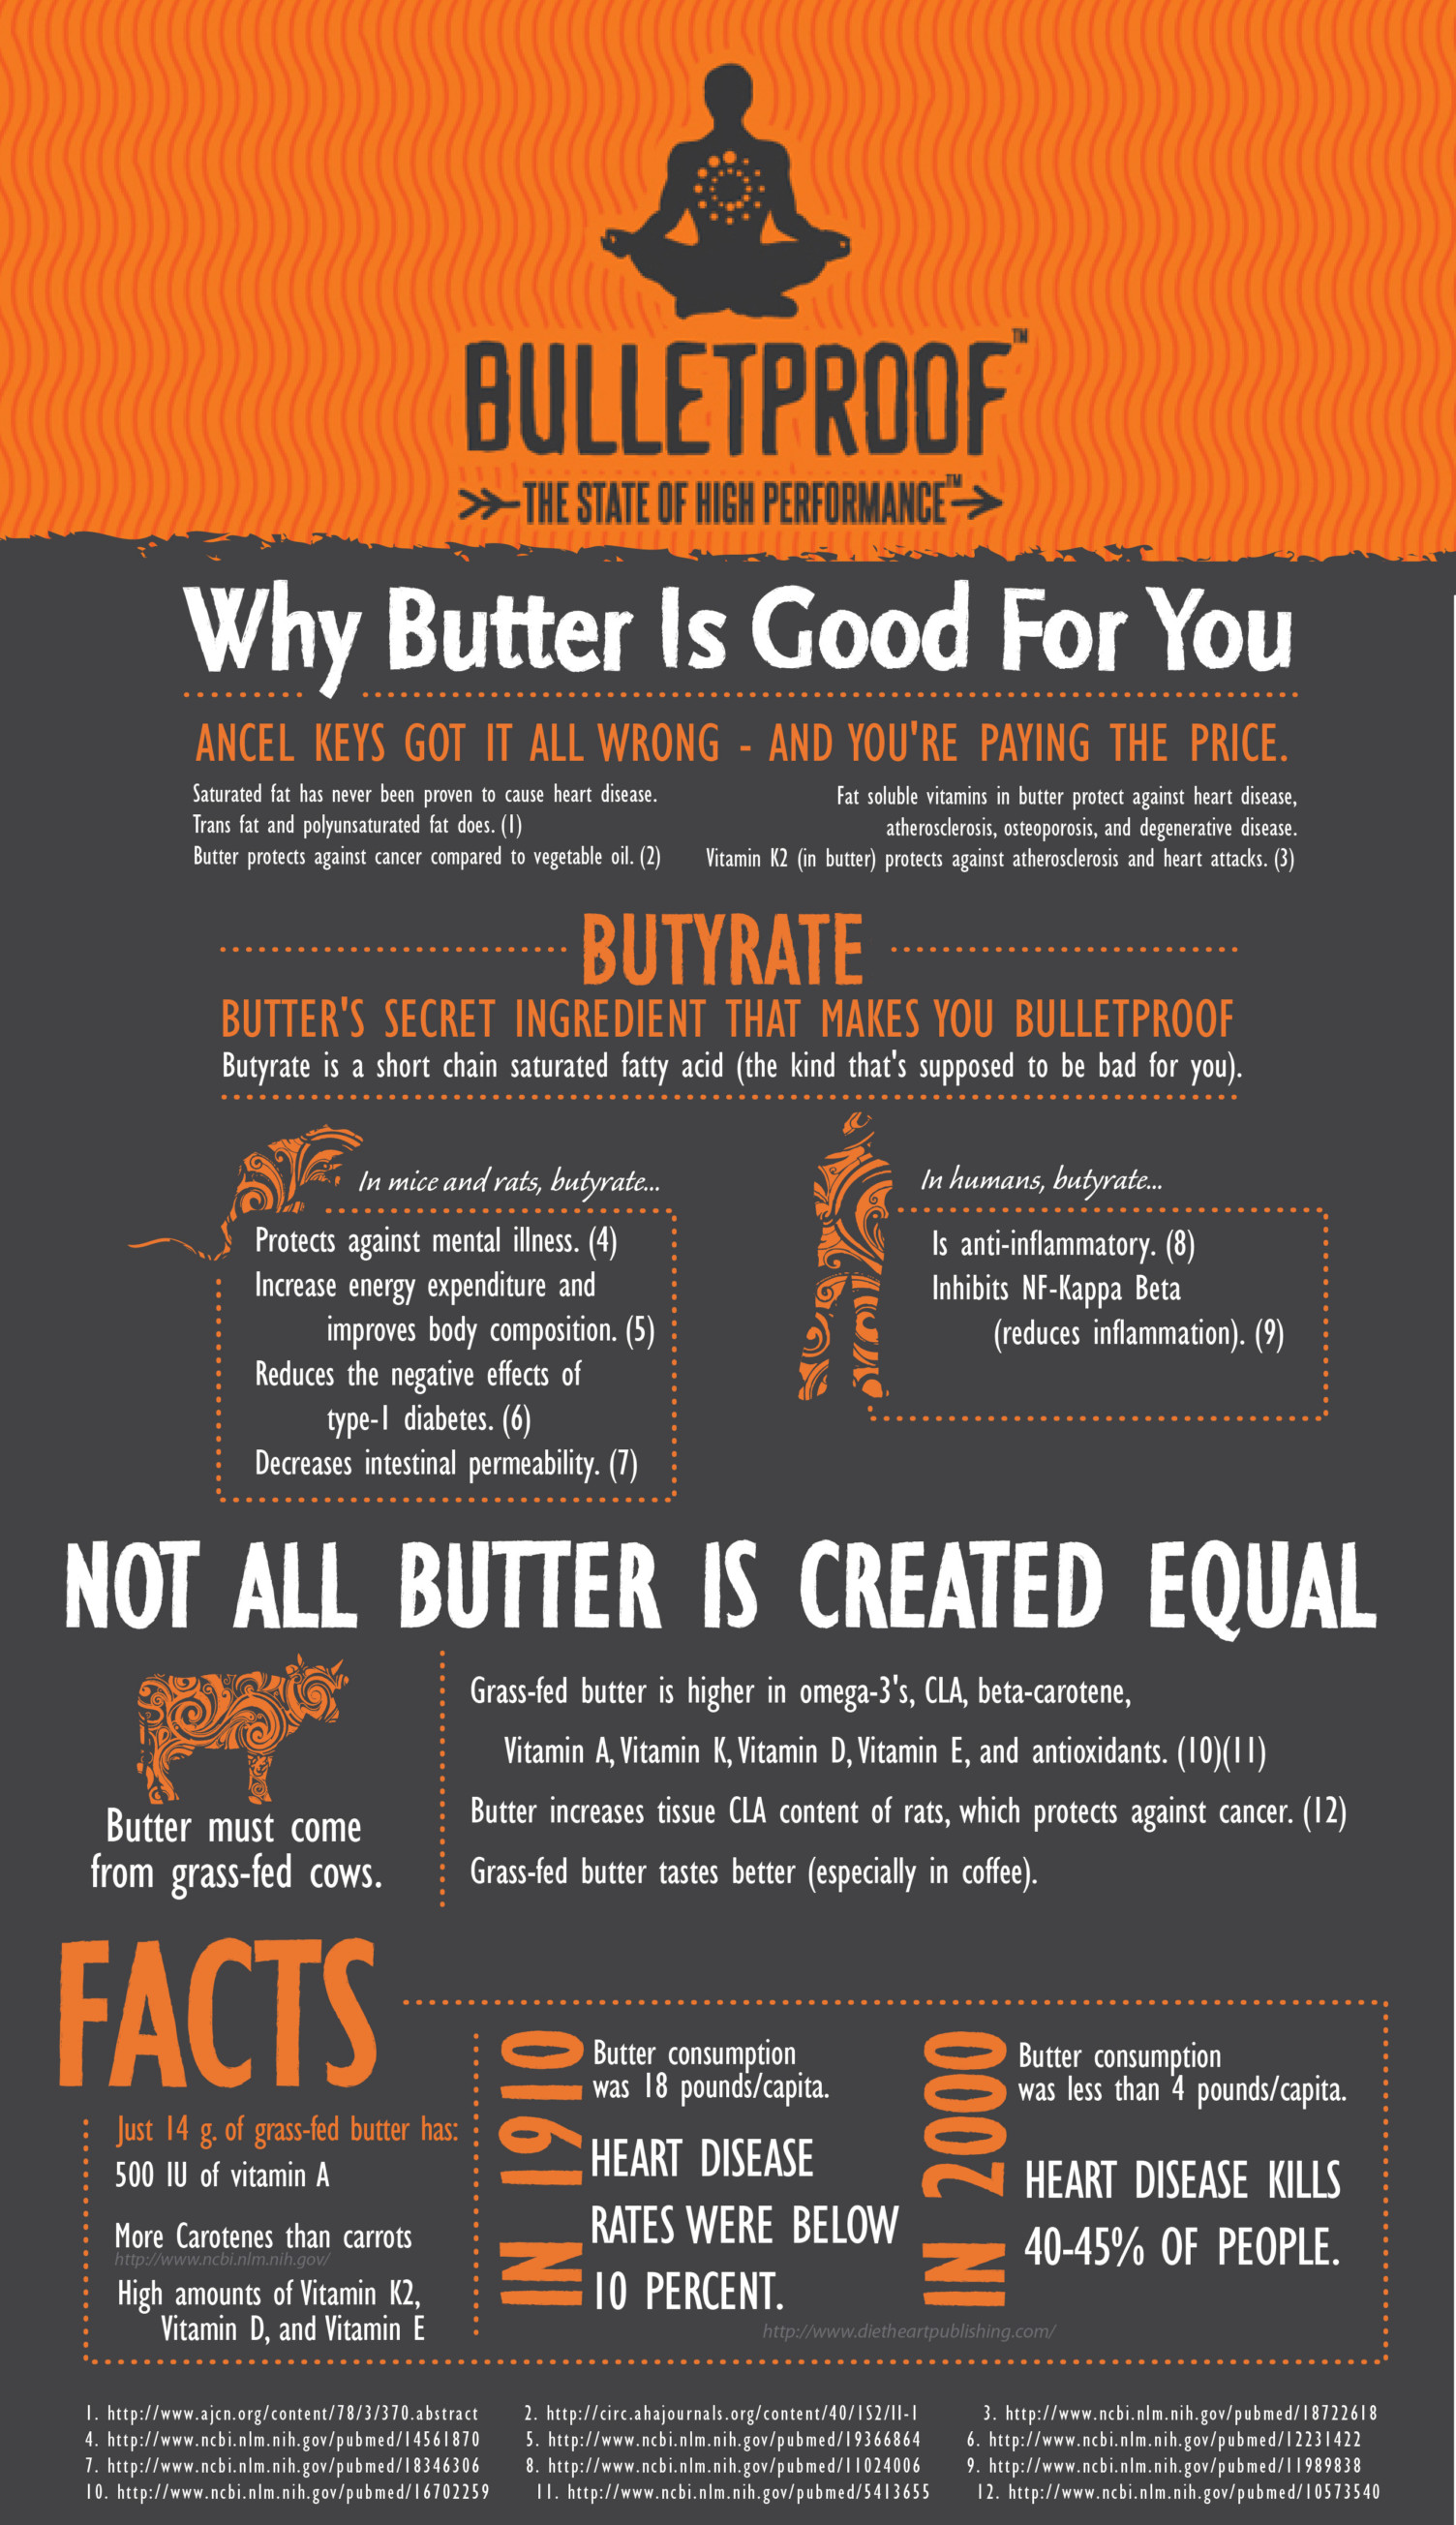 Why Butter Is Good For You